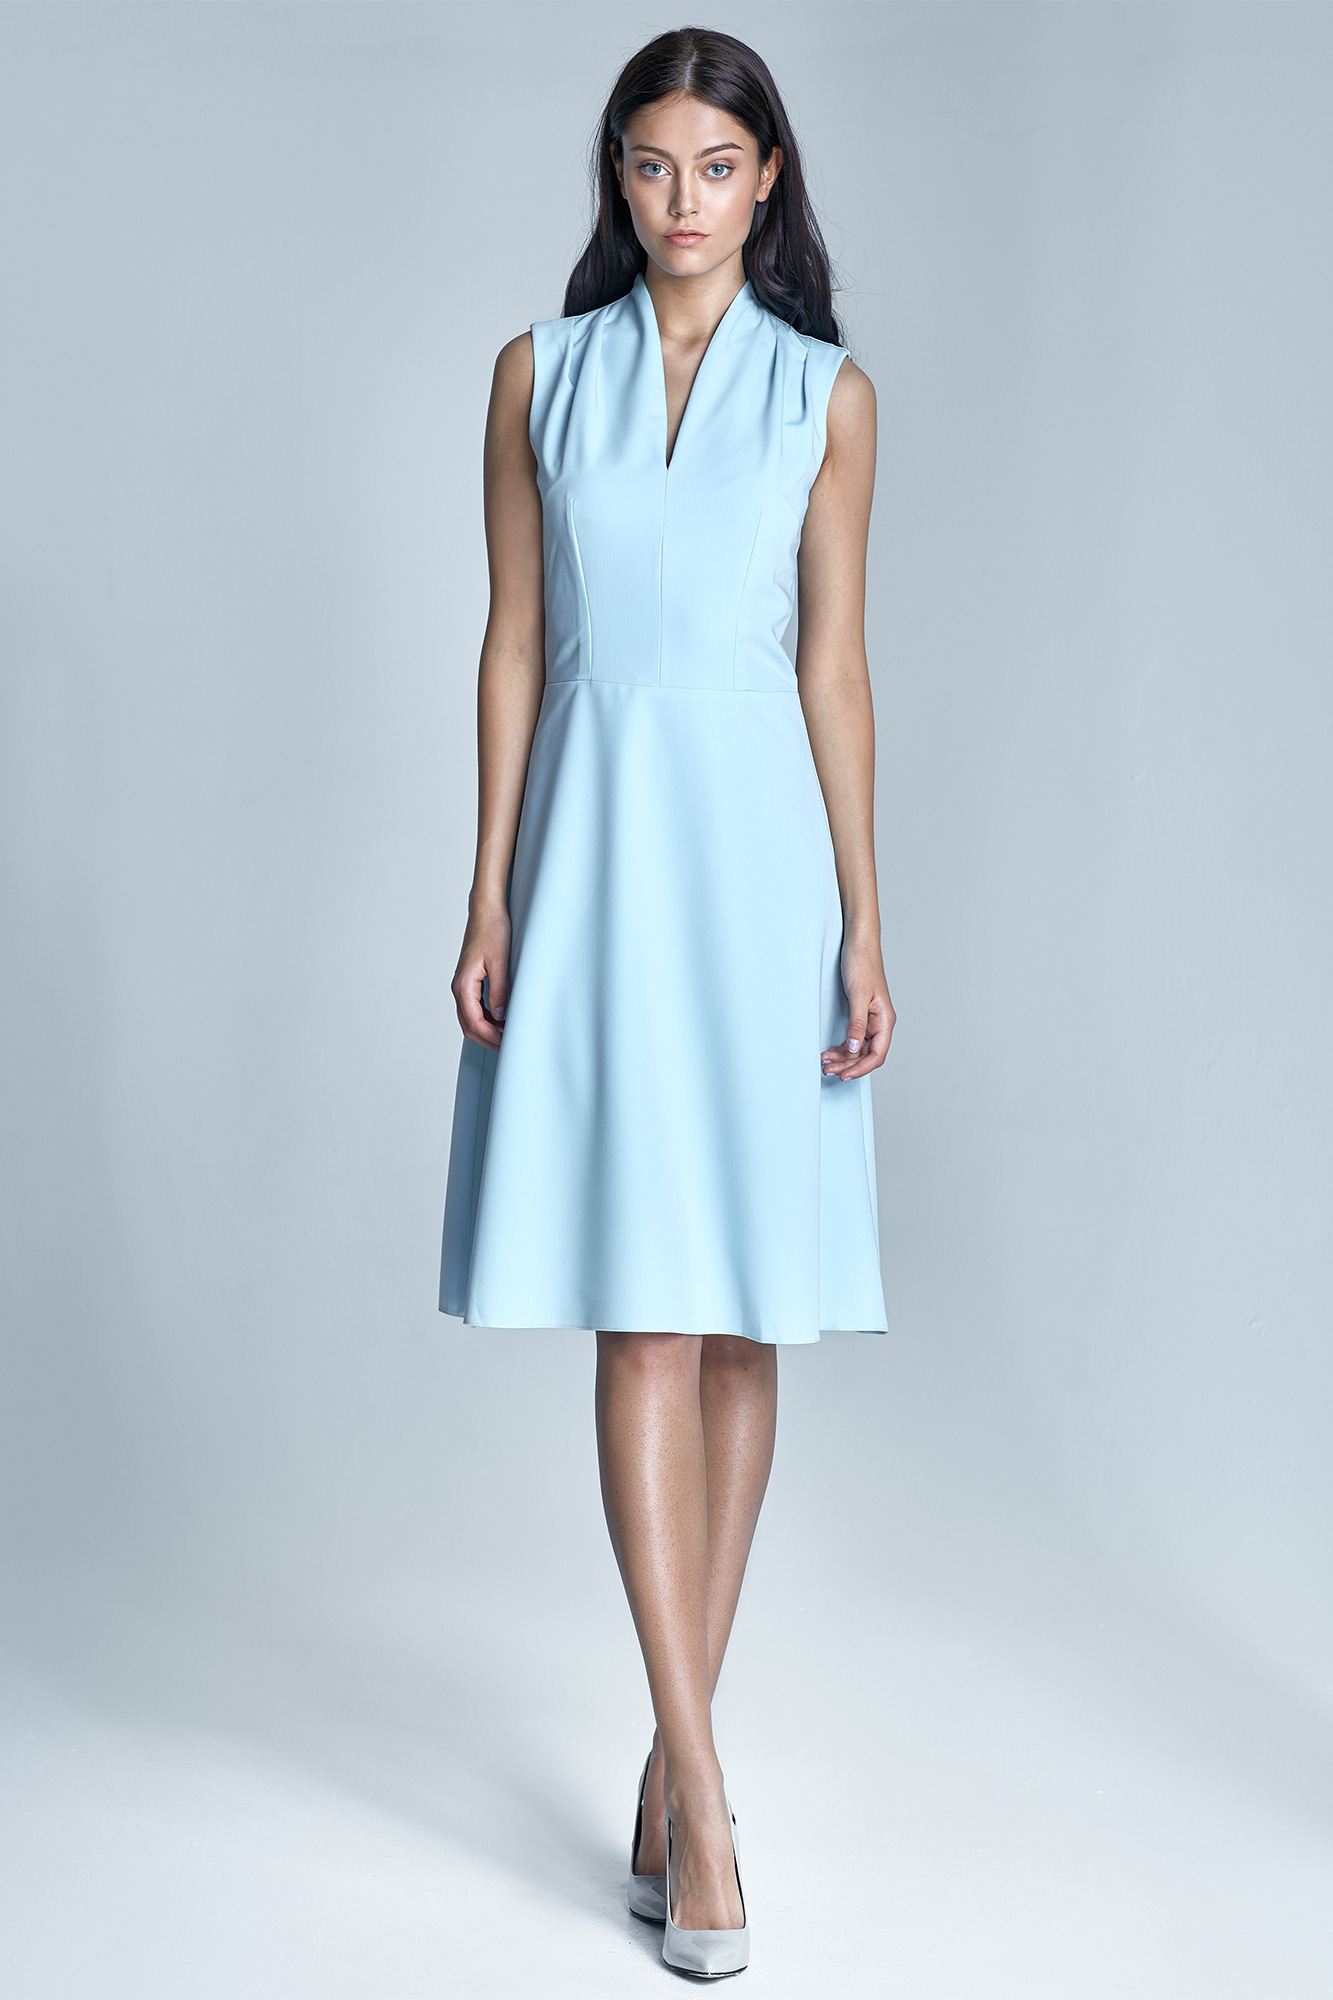 Swan neck dress and high-waisted flared skirt, pastel blue